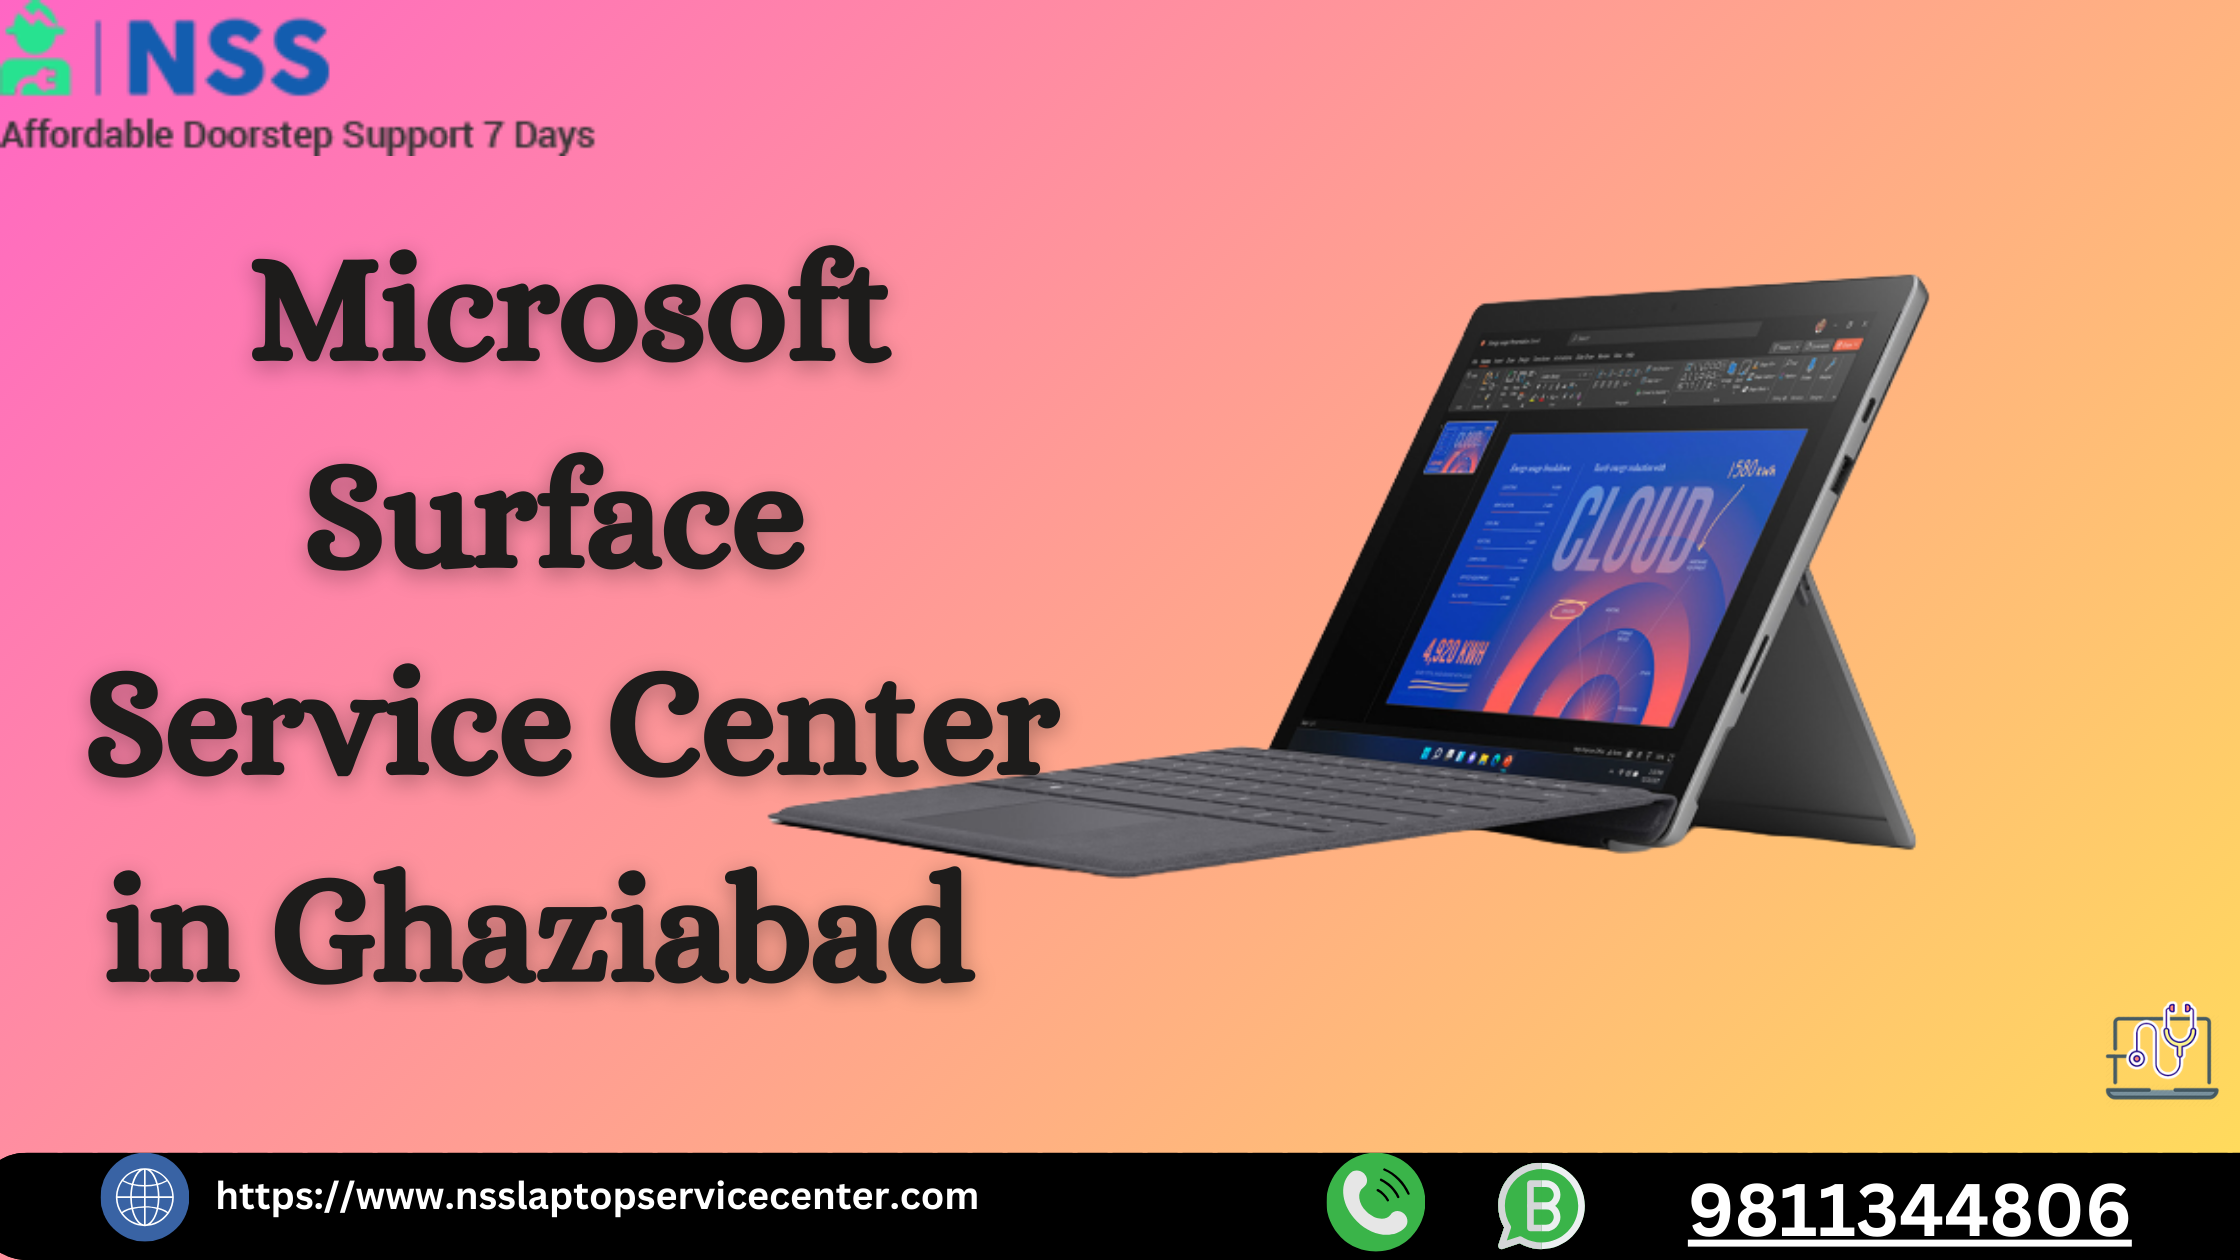 Microsoft Surface Service Center in Ghaziabad